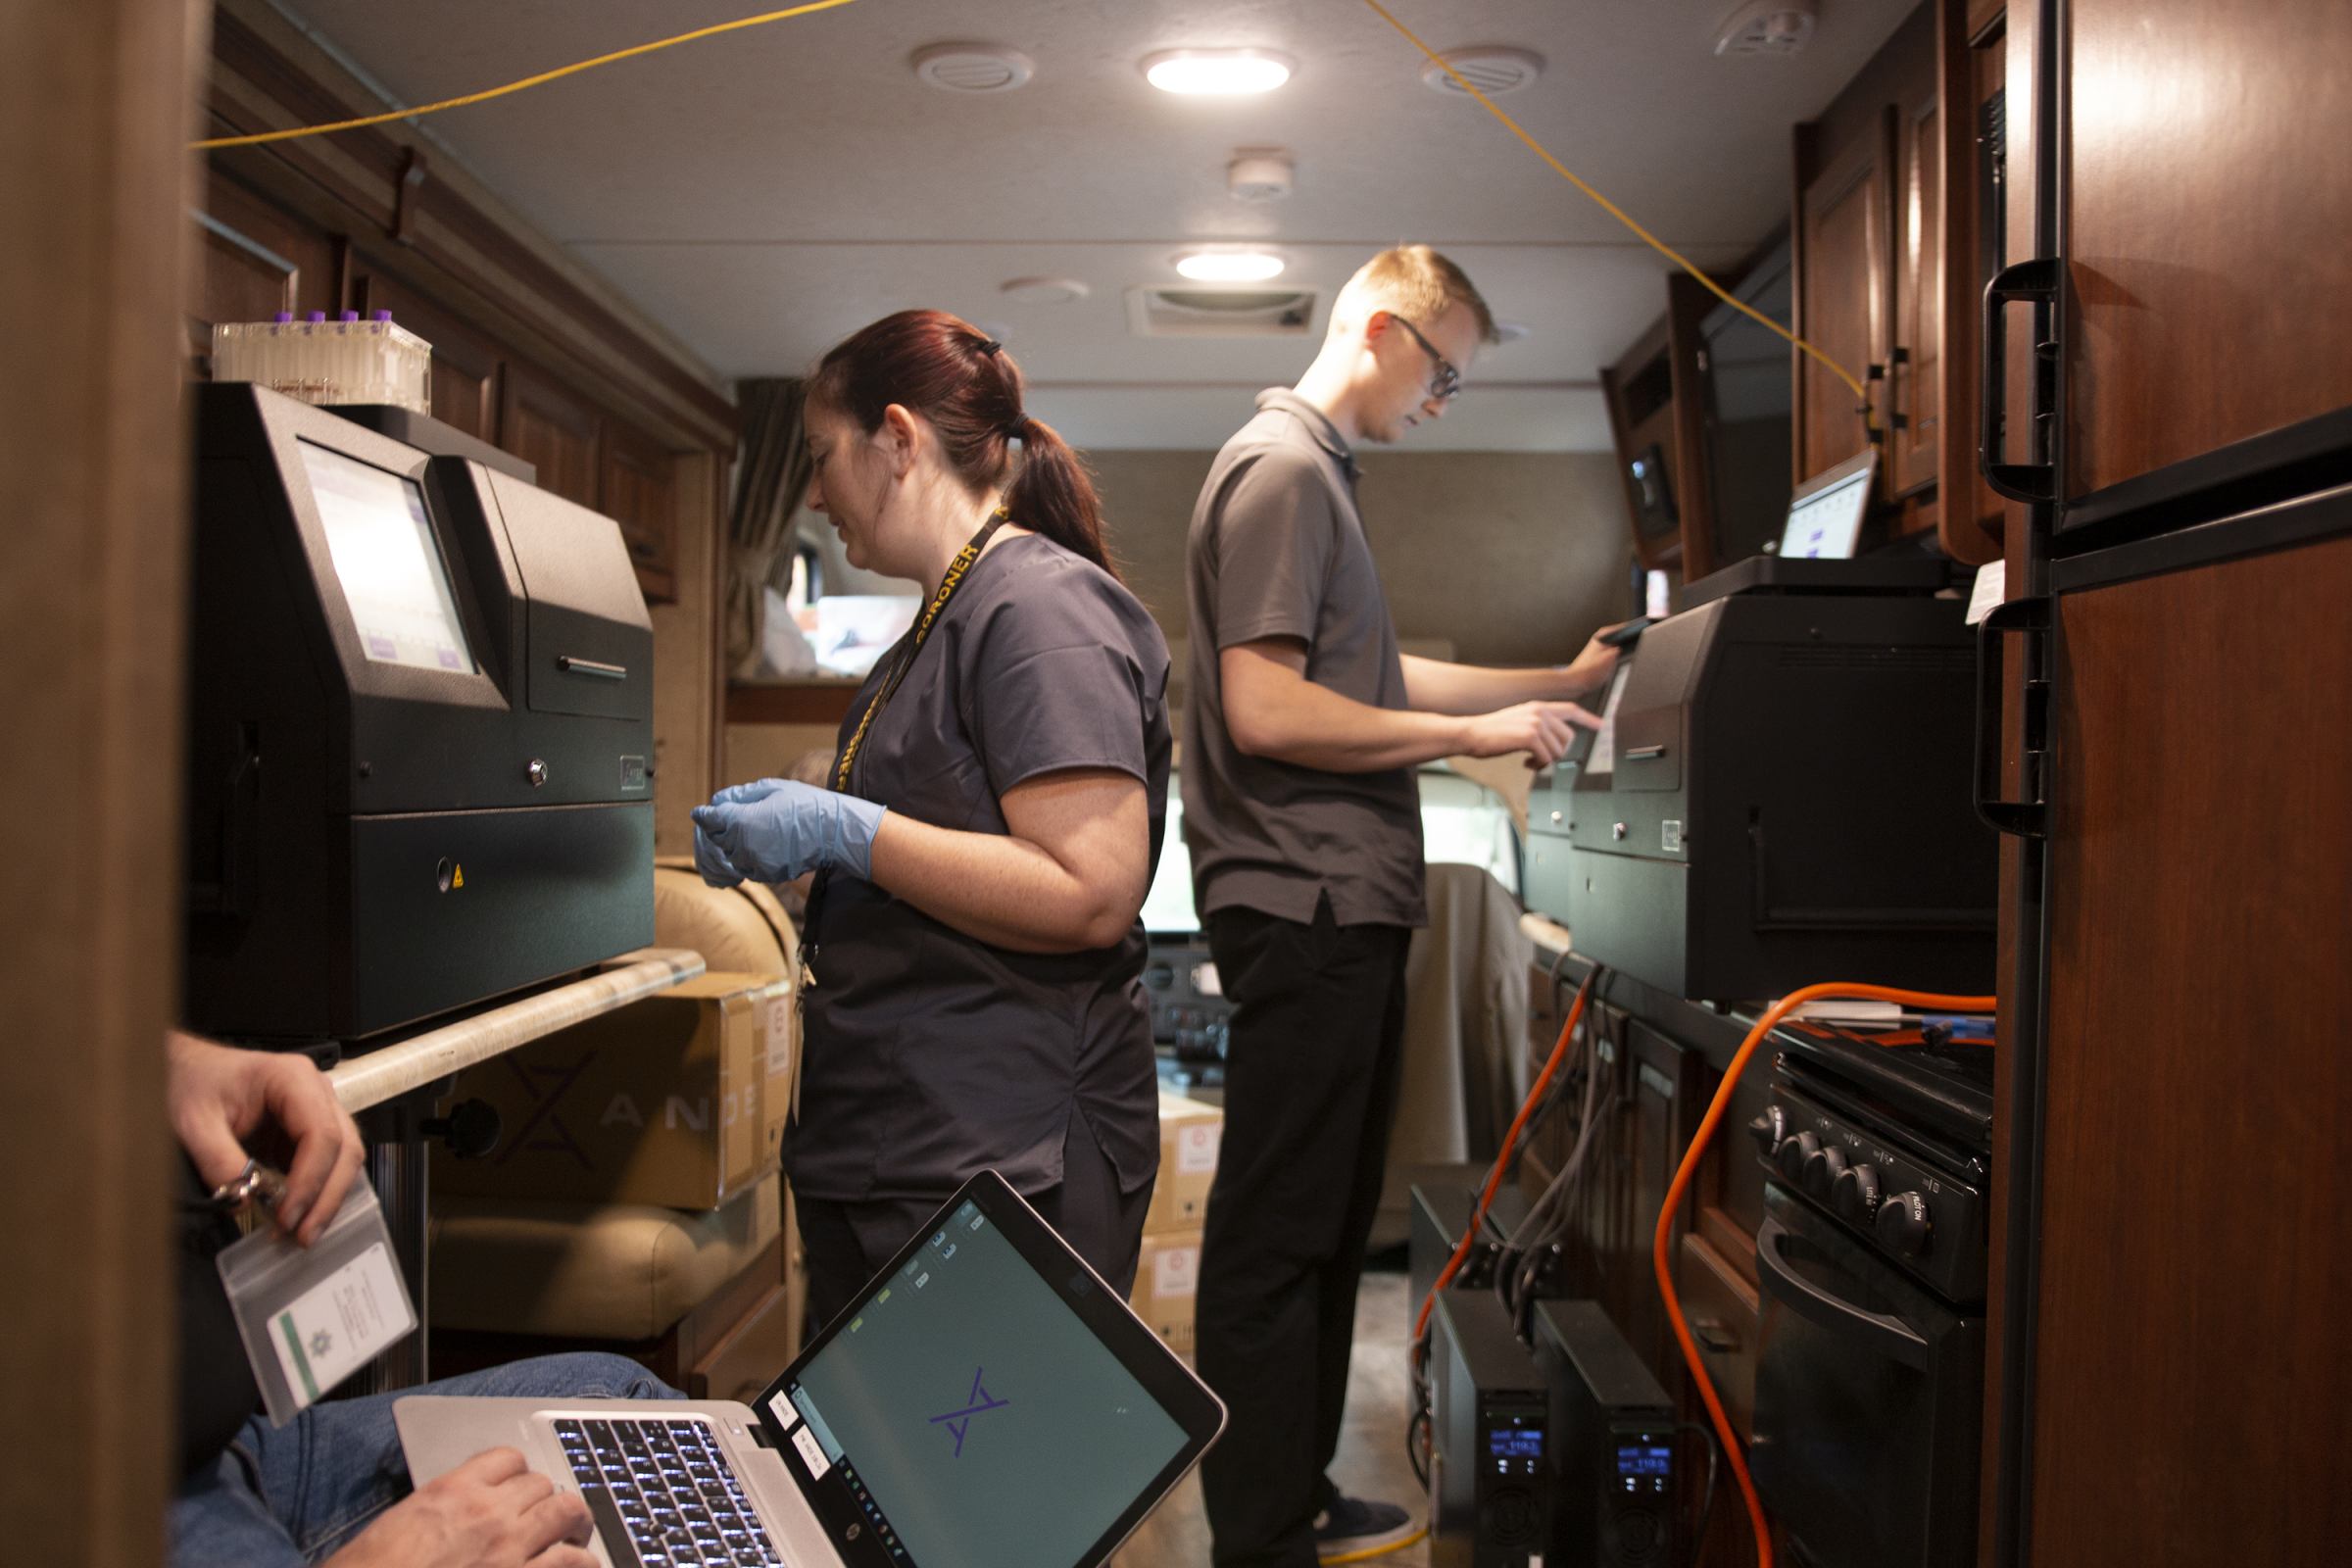 ANDE staff analyze DNA samples in their own RV equipped with three Rapid DNA machines. The RV was parked in the Coroner’s parking lot for quicker access to victim’s DNA. Image by ANDE Corporation.